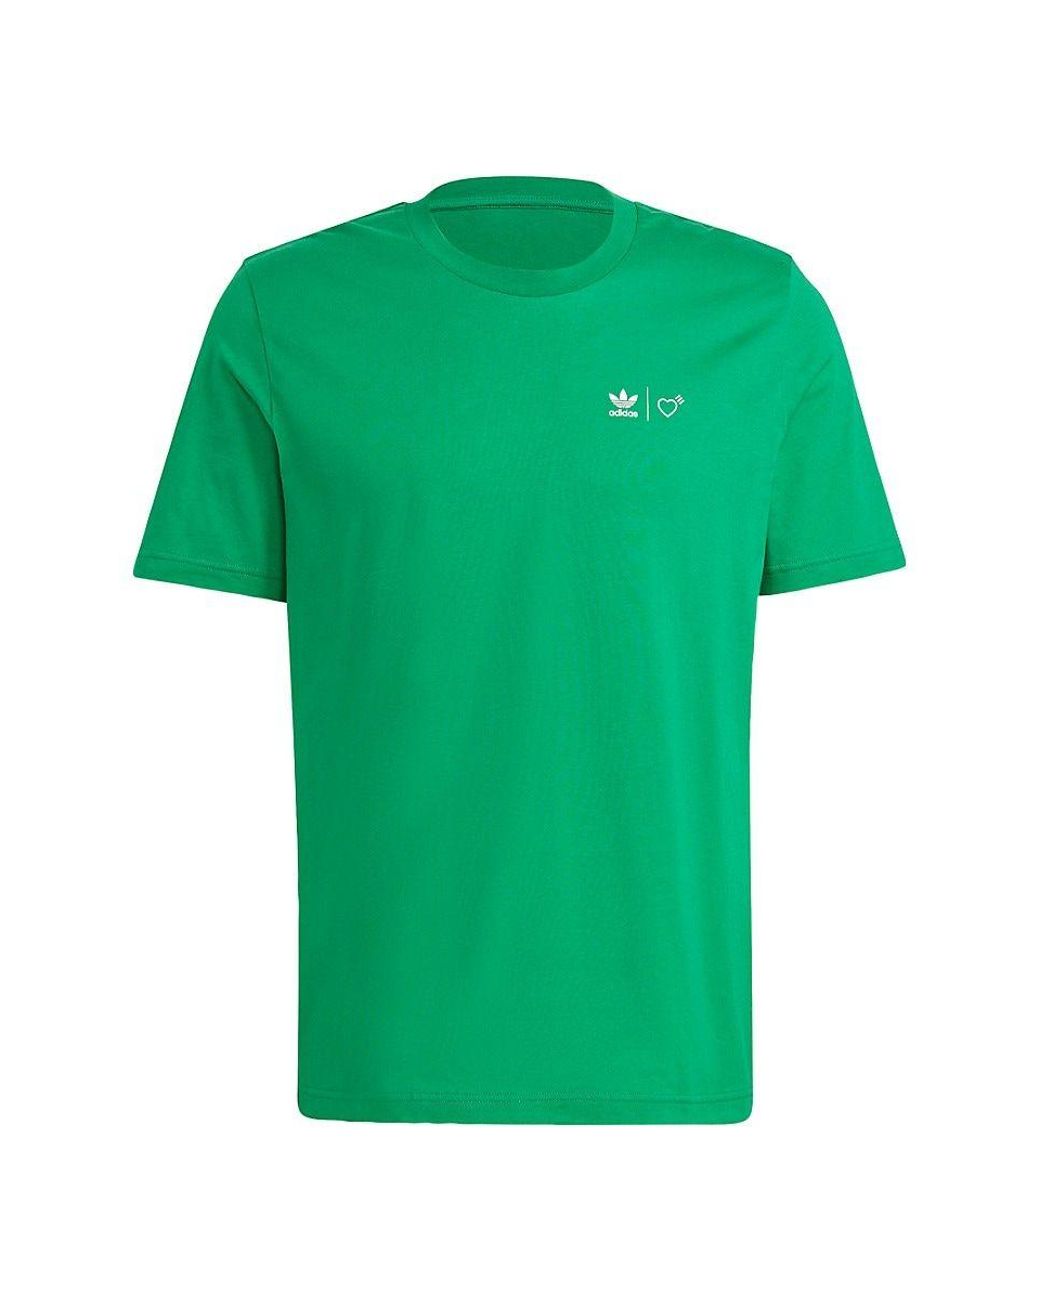 adidas Originals By Human Made Graphic T-shirt in Green for Men | Lyst